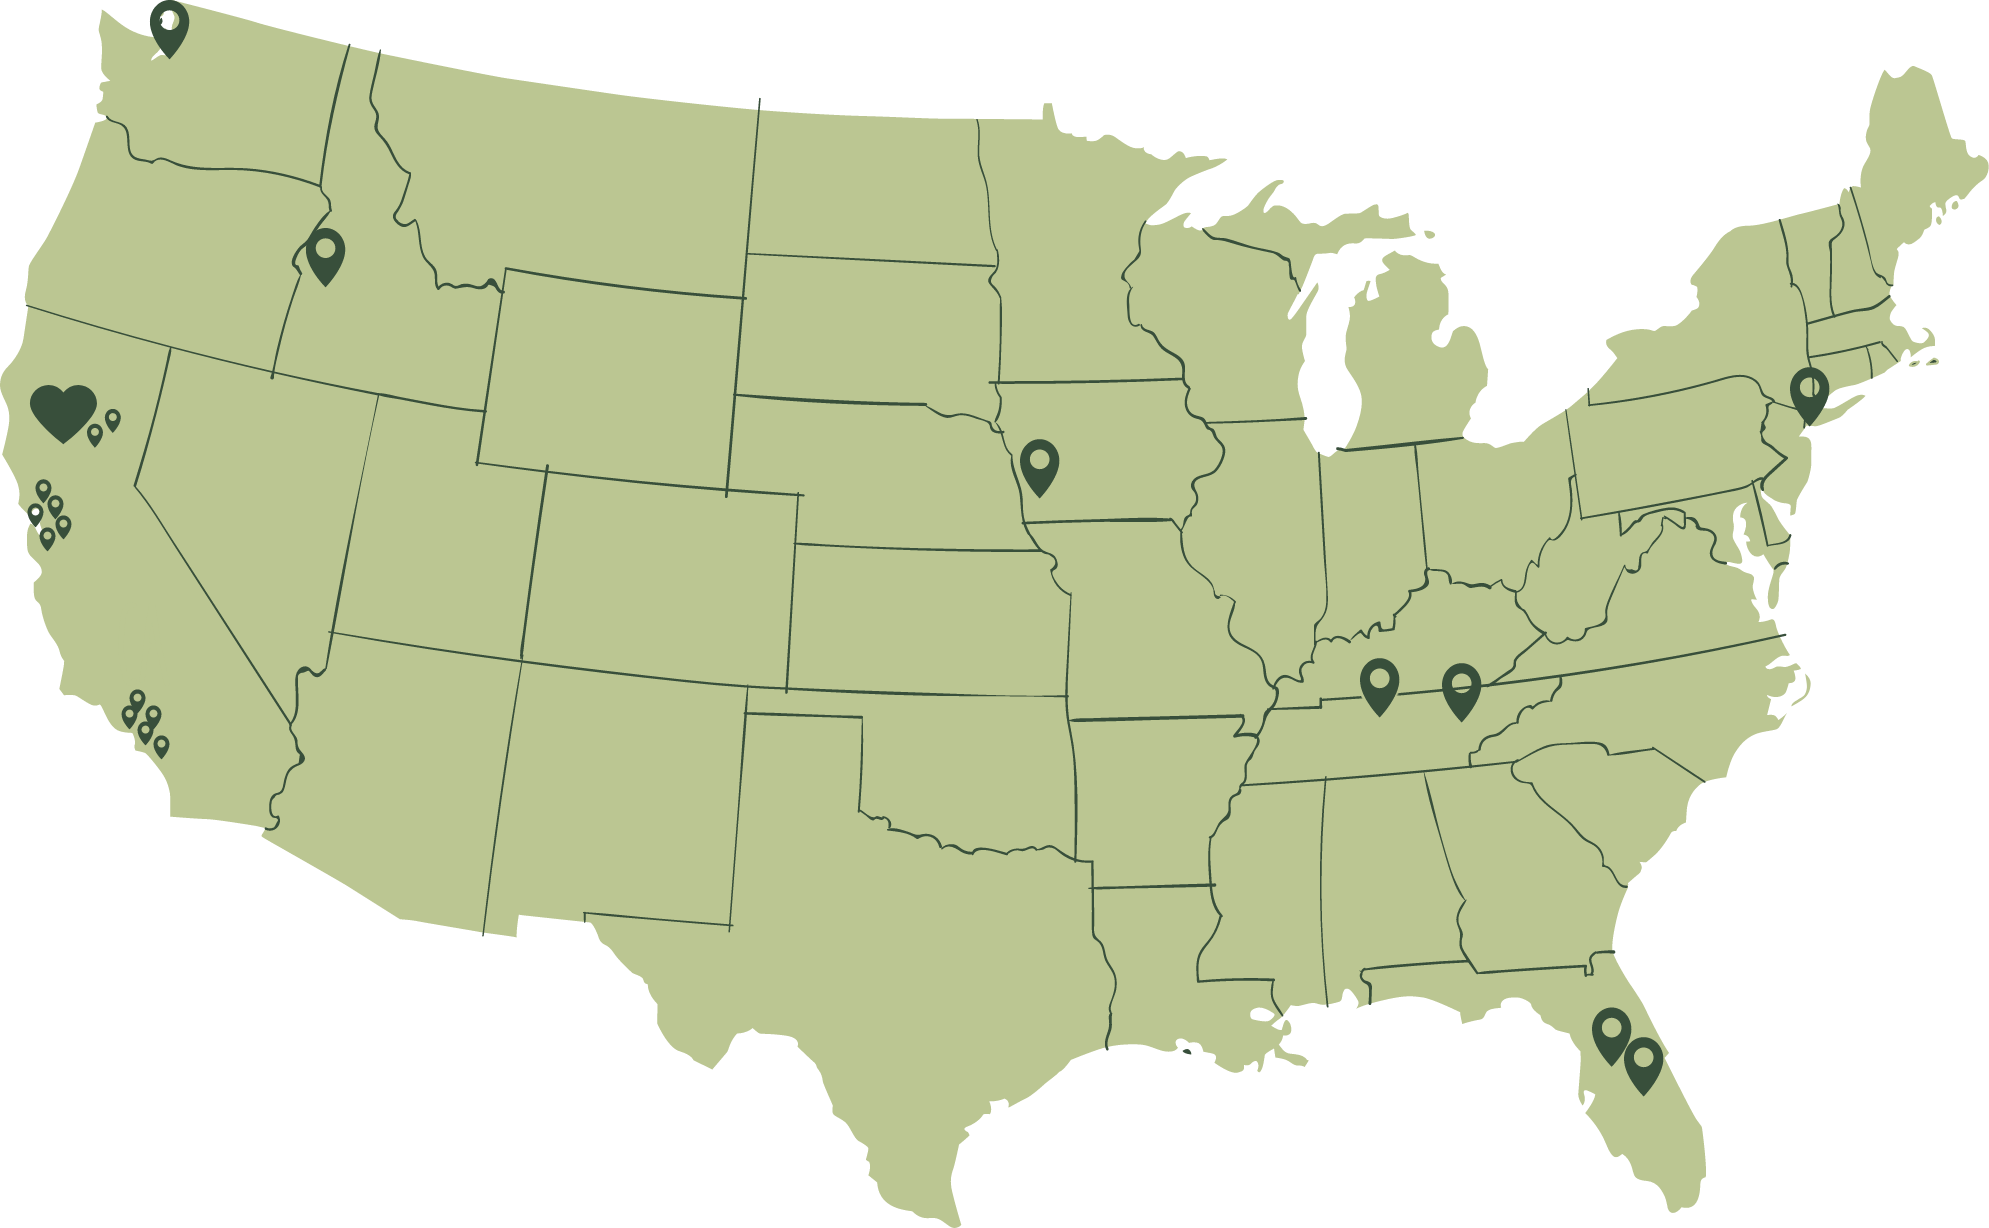 USA map of nest bedding employee locations